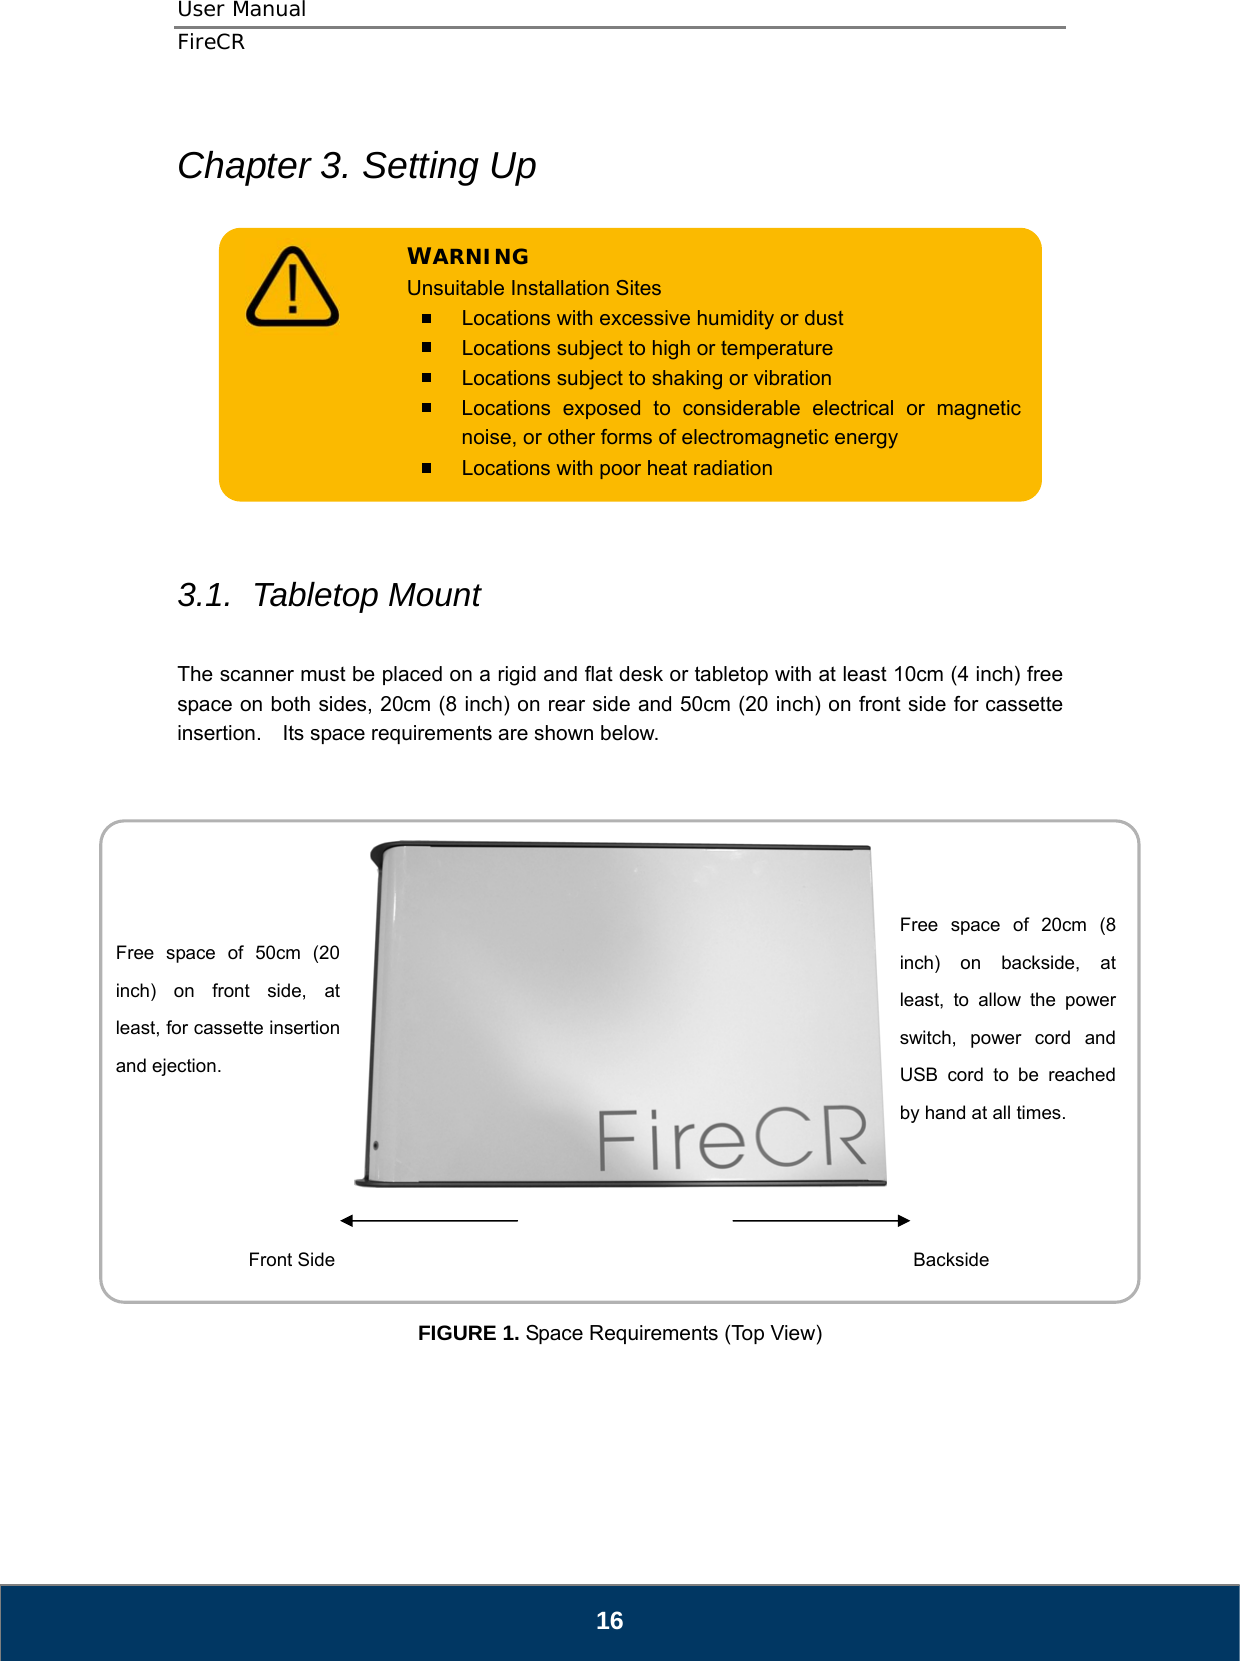 User Manual  FireCR  Chapter 3. Setting Up     Locations with poor heat radiation   Locations subject to shaking or vibration   Locations exposed to considerable electrical or magnetic noise, or other forms of electromagnetic energy   Locations with excessive humidity or dust   Locations subject to high or temperature WARNING Unsuitable Installation Sites           3.1.  Tabletop Mount  The scanner must be placed on a rigid and flat desk or tabletop with at least 10cm (4 inch) free space on both sides, 20cm (8 inch) on rear side and 50cm (20 inch) on front side for cassette insertion.    Its space requirements are shown below.       Free space of 20cm (8 inch) on backside, at least, to allow the power switch, power cord and USB cord to be reached by hand at all times. Free space of 50cm (20 inch) on front side, at least, for cassette insertion and ejection. Front Side  Backside  FIGURE 1. Space Requirements (Top View)      16 